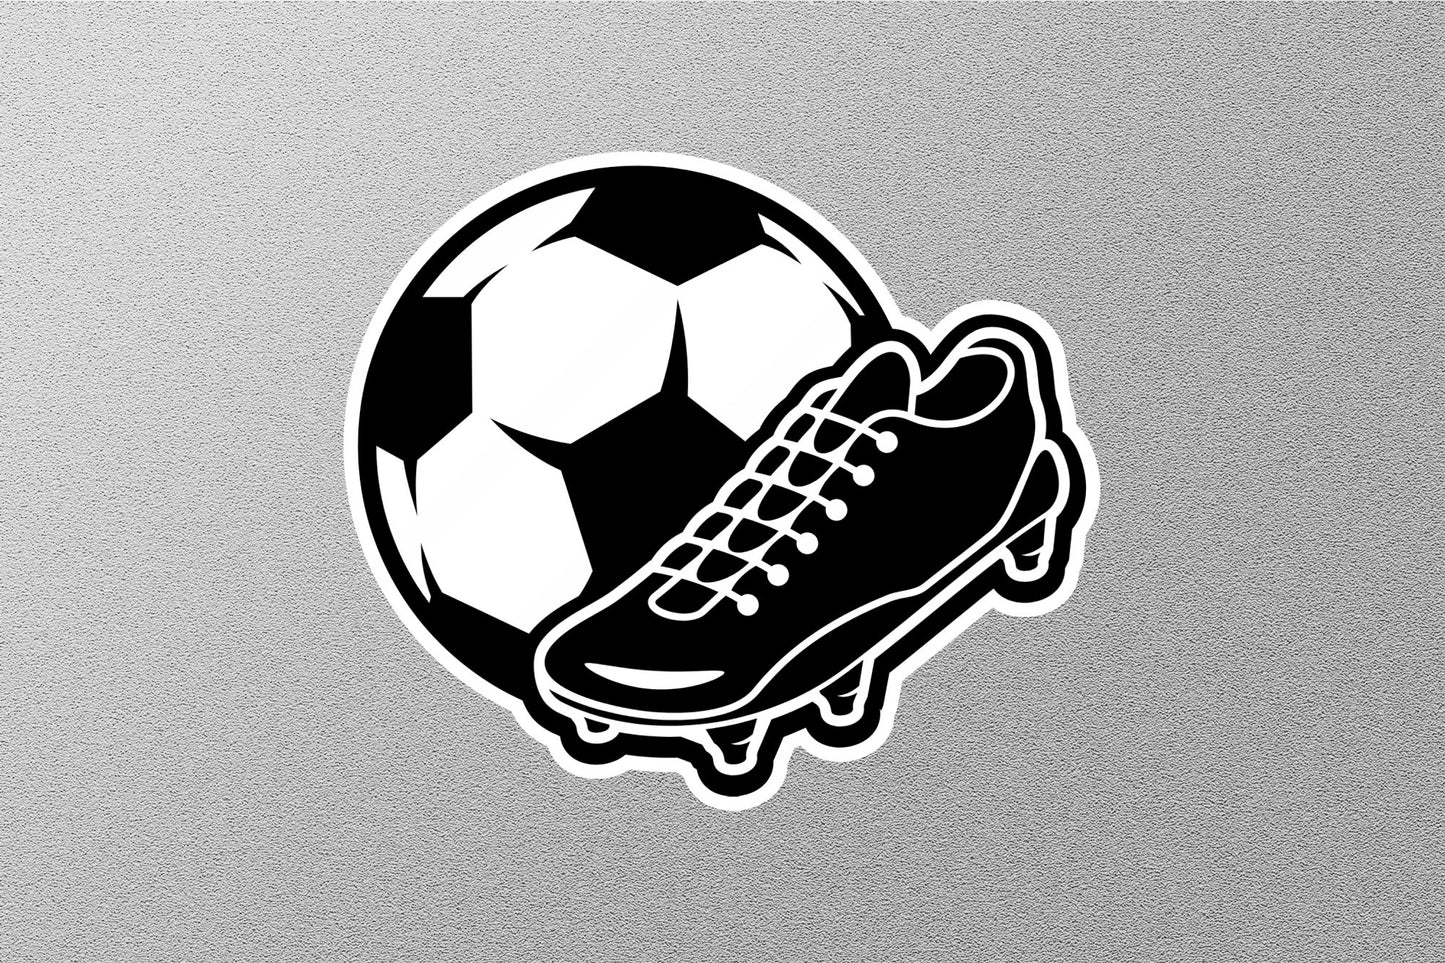 Shoes Illustration Football Soccer and Ball Sticker